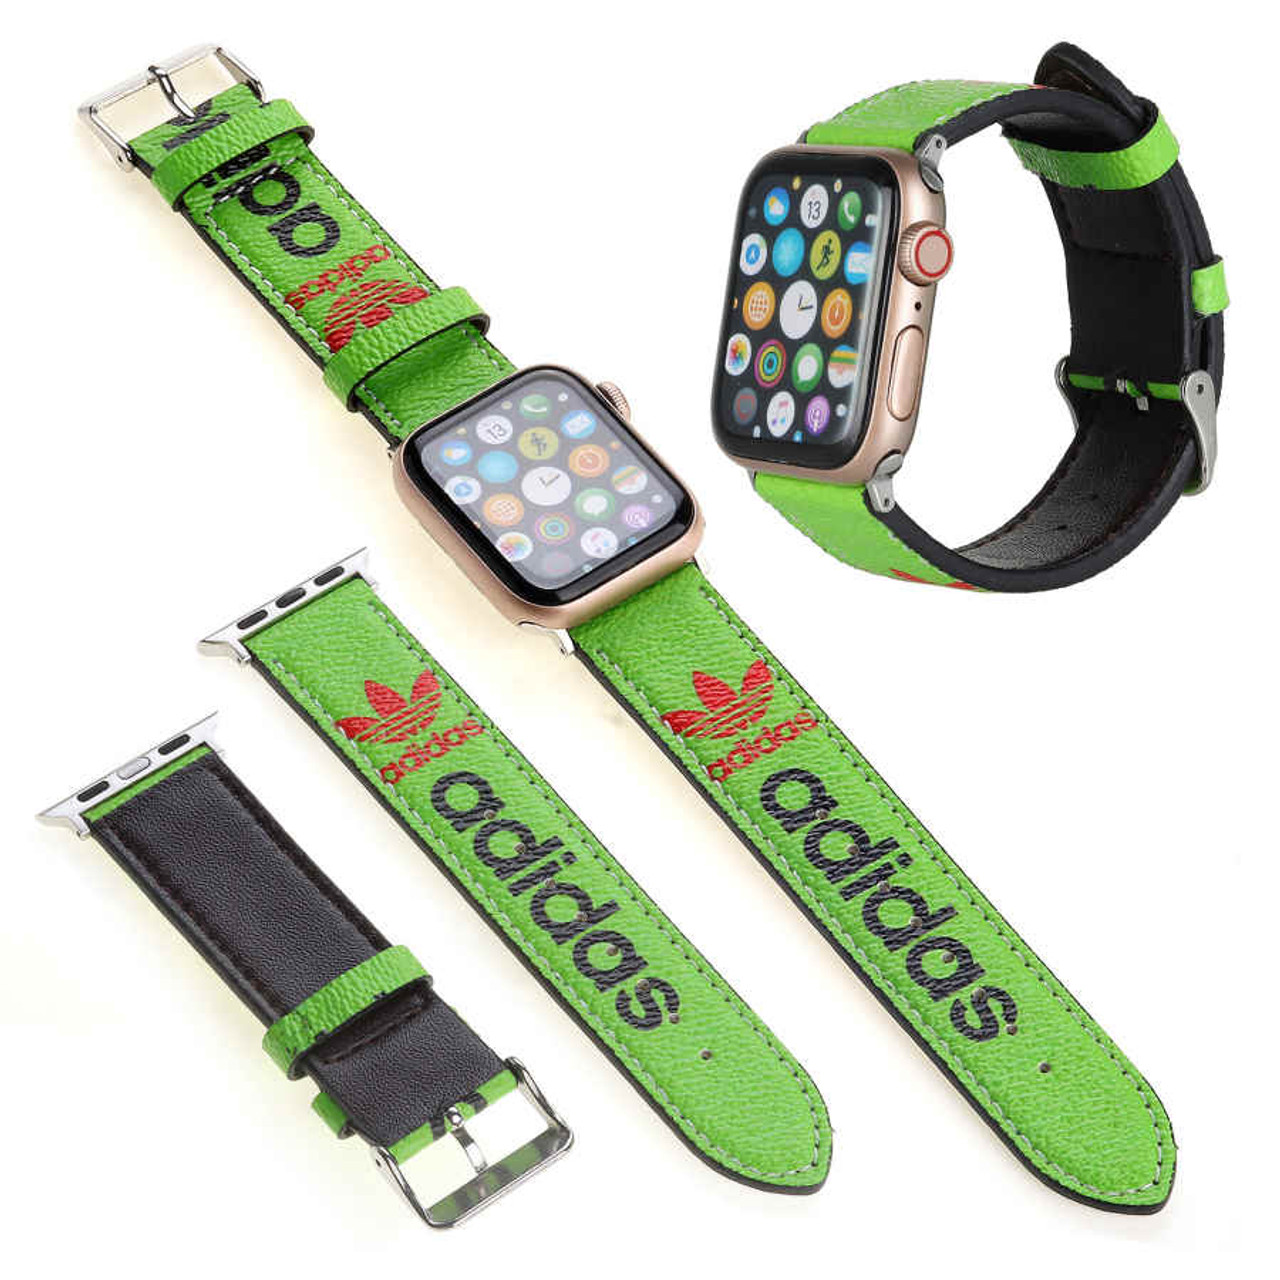 adidas Interval Reversible Wristbands - 3